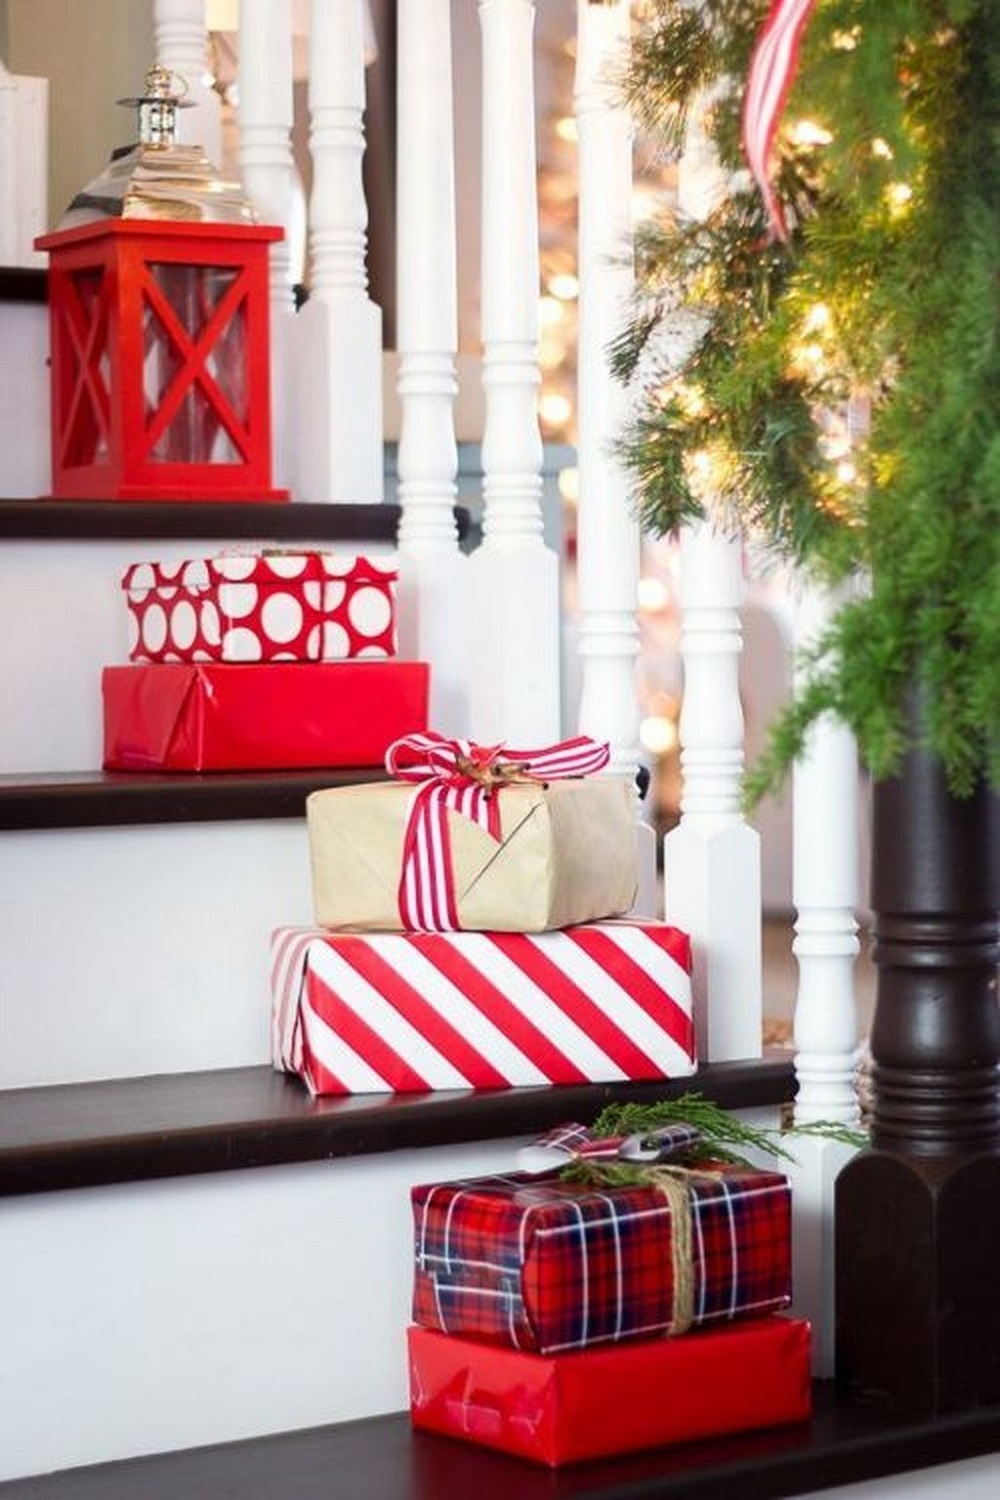 t3-127 Awesome Christmas staircase decorating ideas you should absolutely try